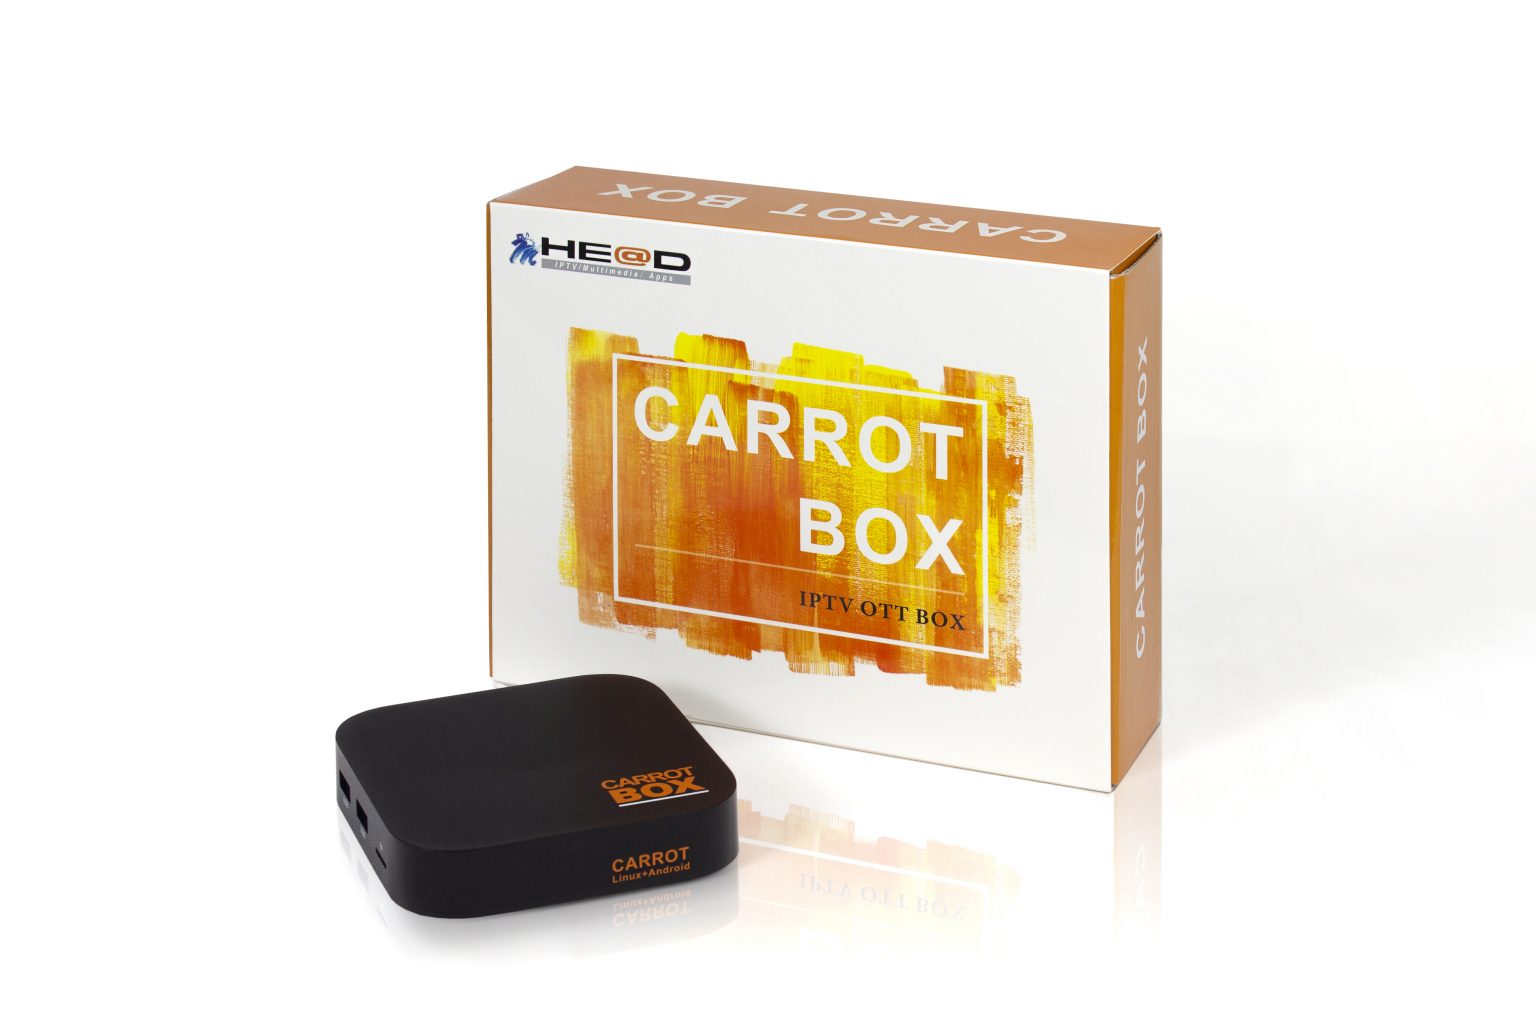 CARROT BOX Device with box